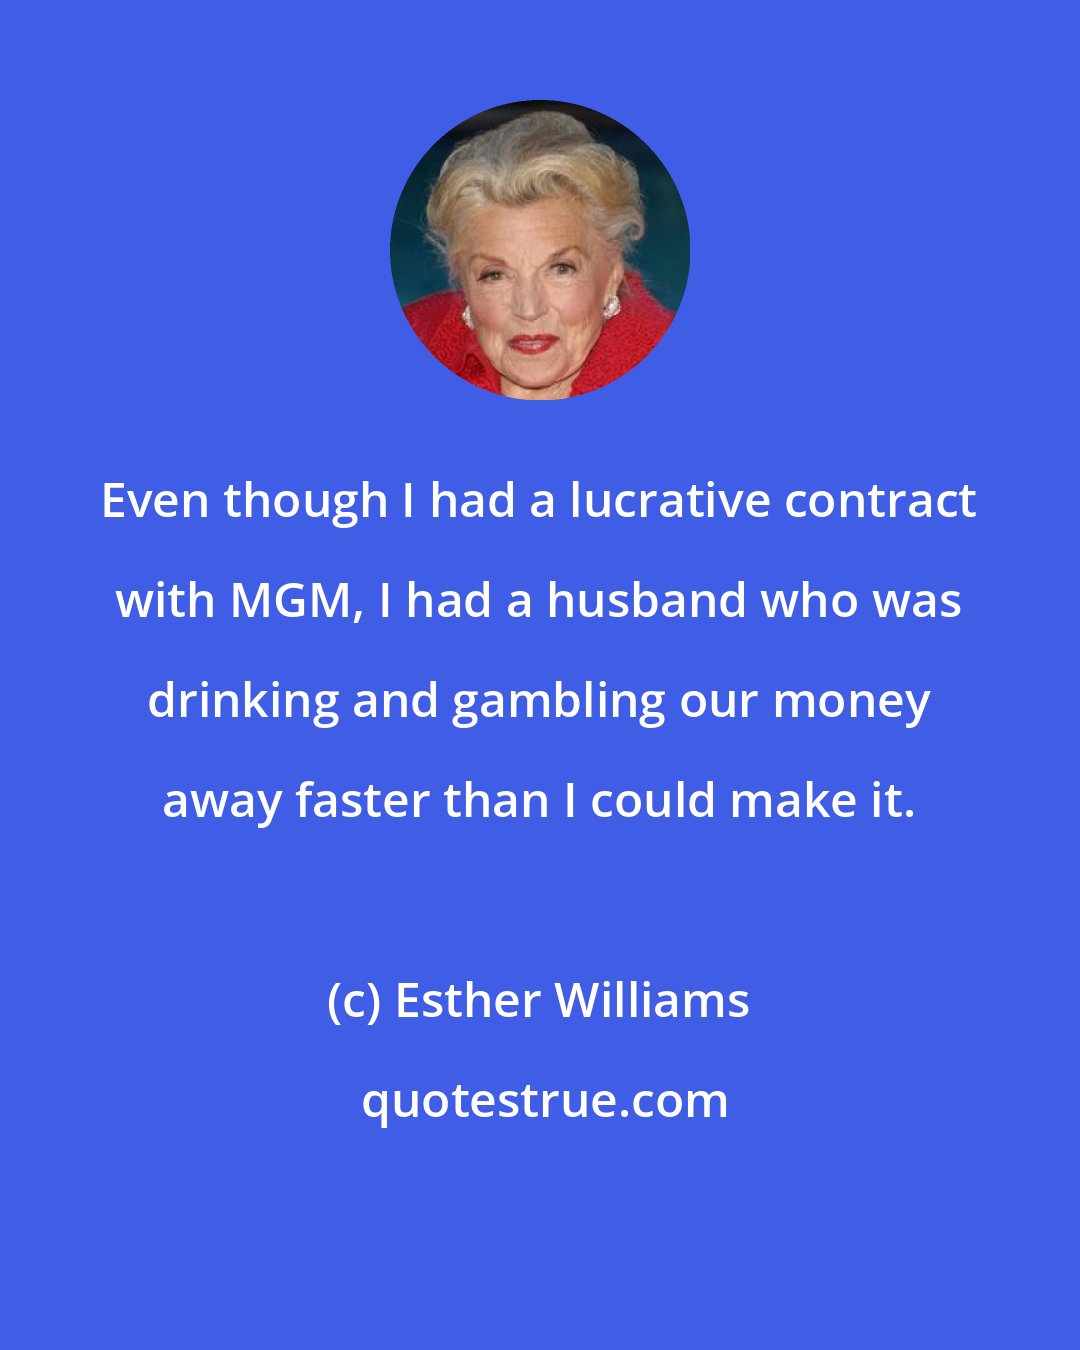 Esther Williams: Even though I had a lucrative contract with MGM, I had a husband who was drinking and gambling our money away faster than I could make it.